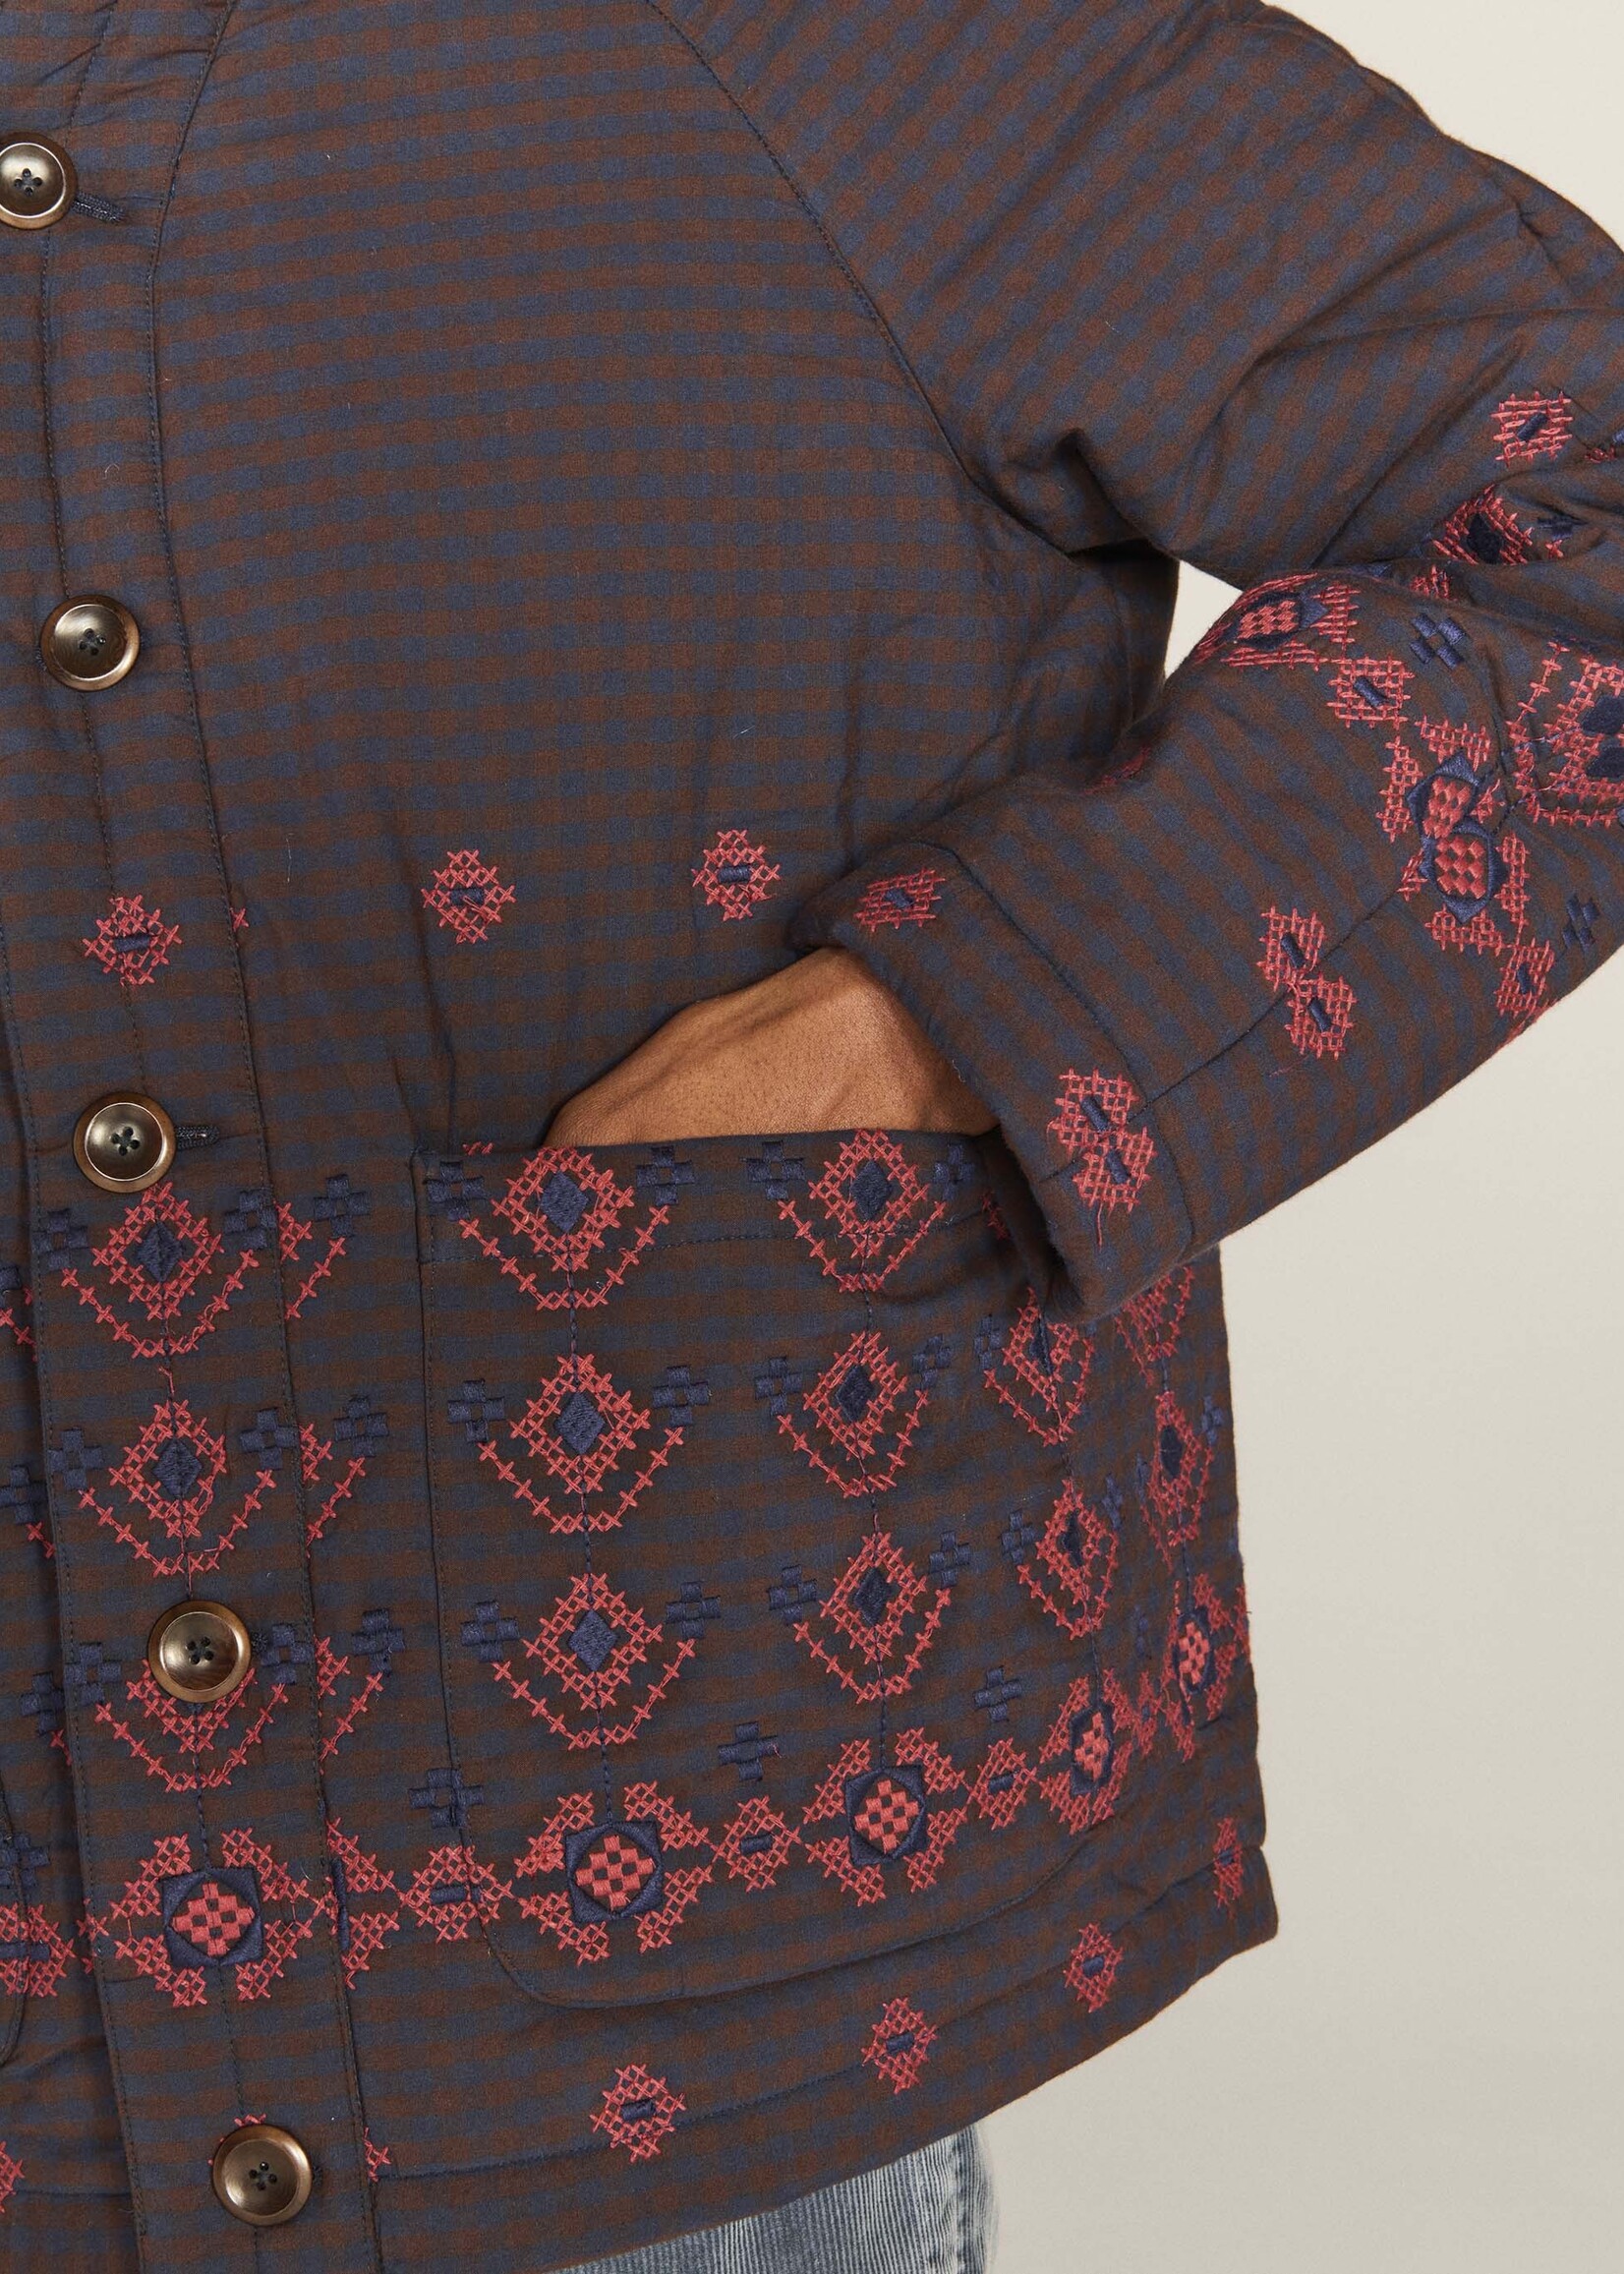 YMC Erkin Embroidered Kimono Jacket in Navy and Brown